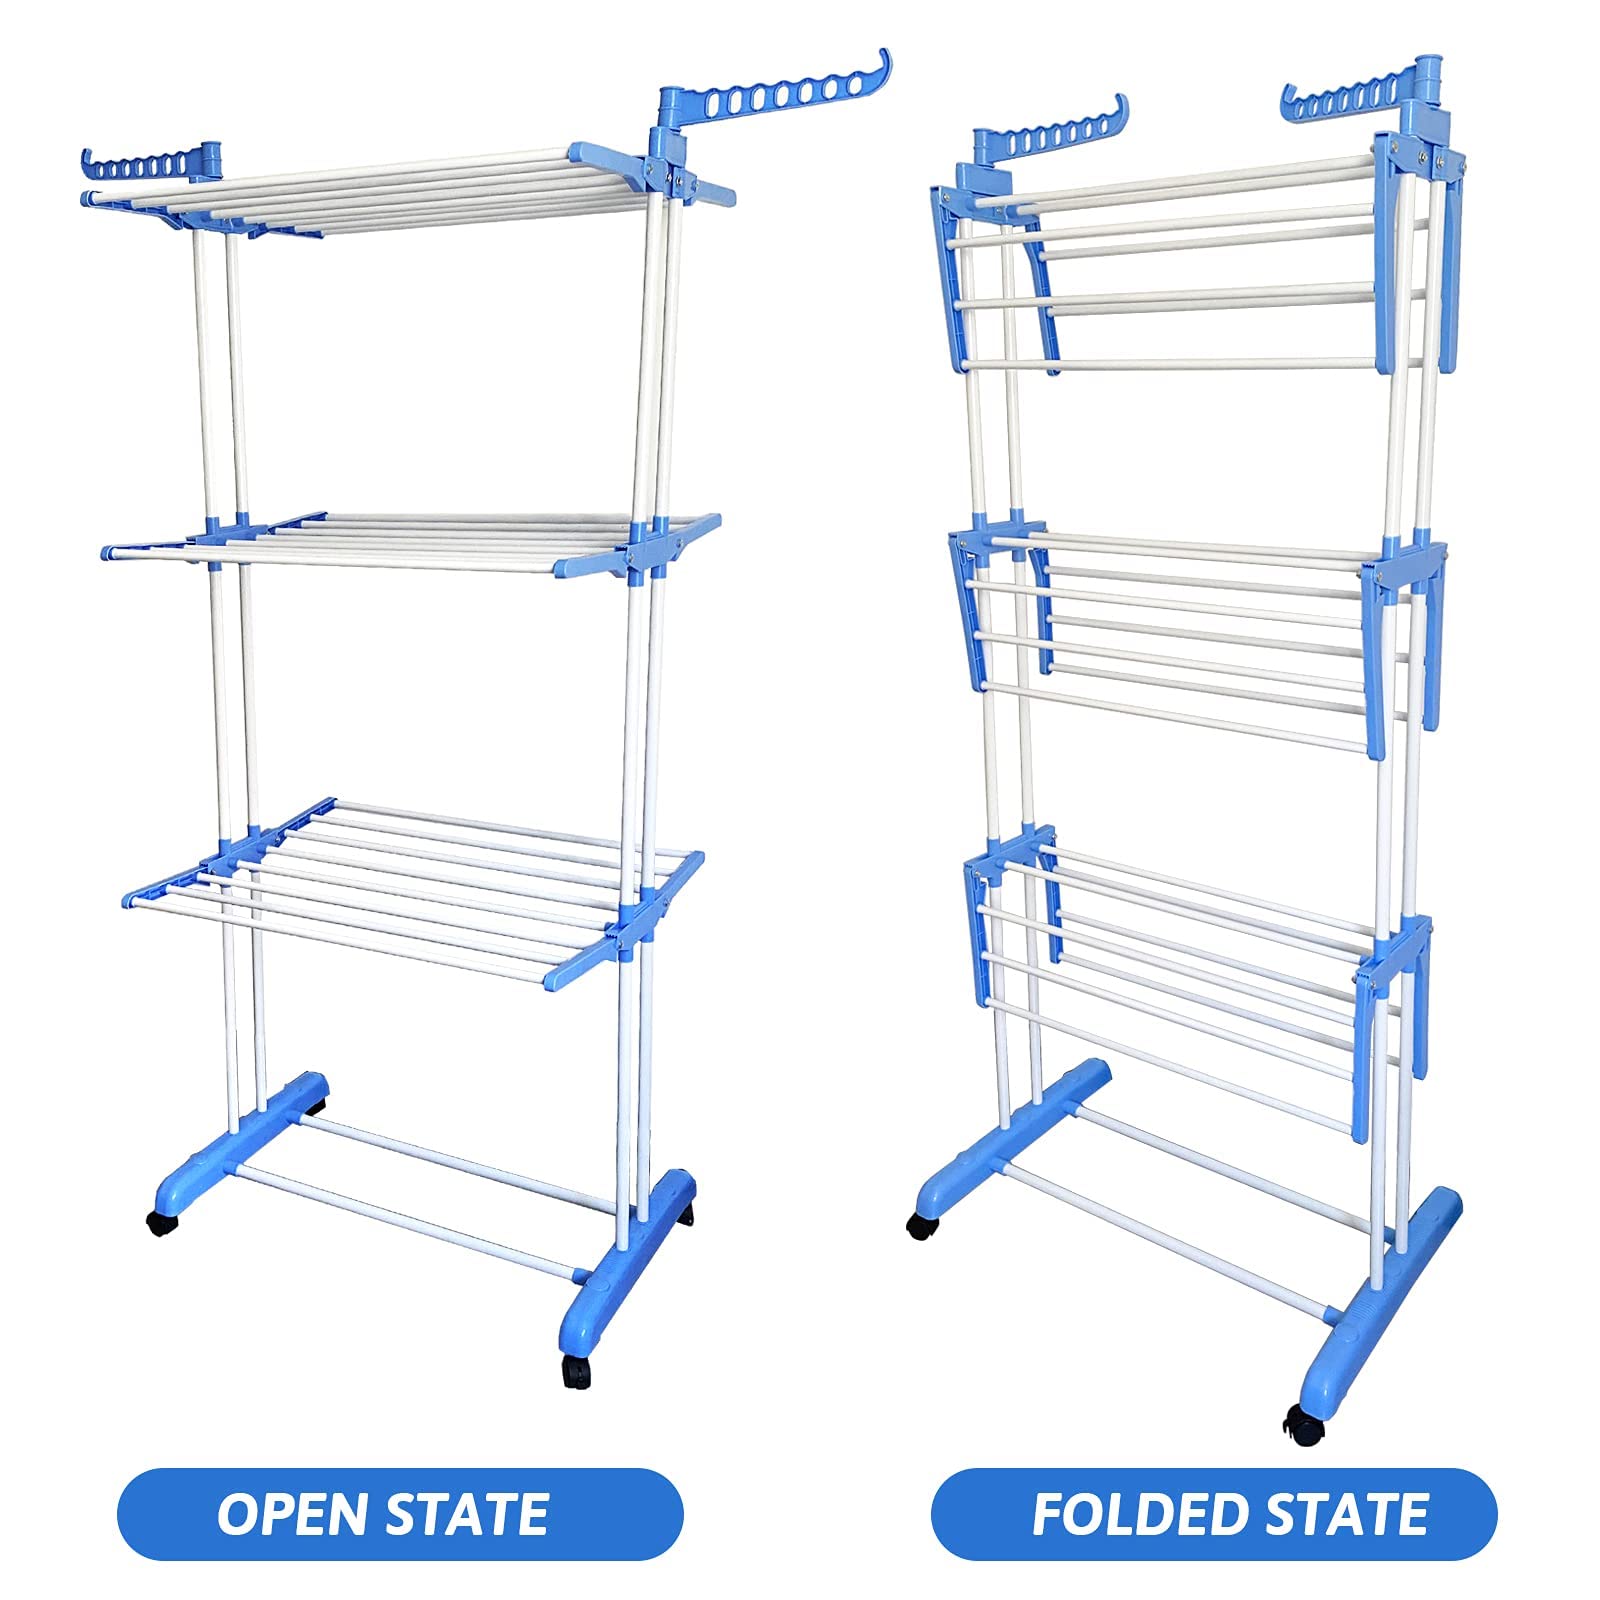 VIO Clothes Drying Rack,Foldable Clothes Hanger Adjustable Large Stainless Steel Garment Laundry Racks for Indoor Outdoor